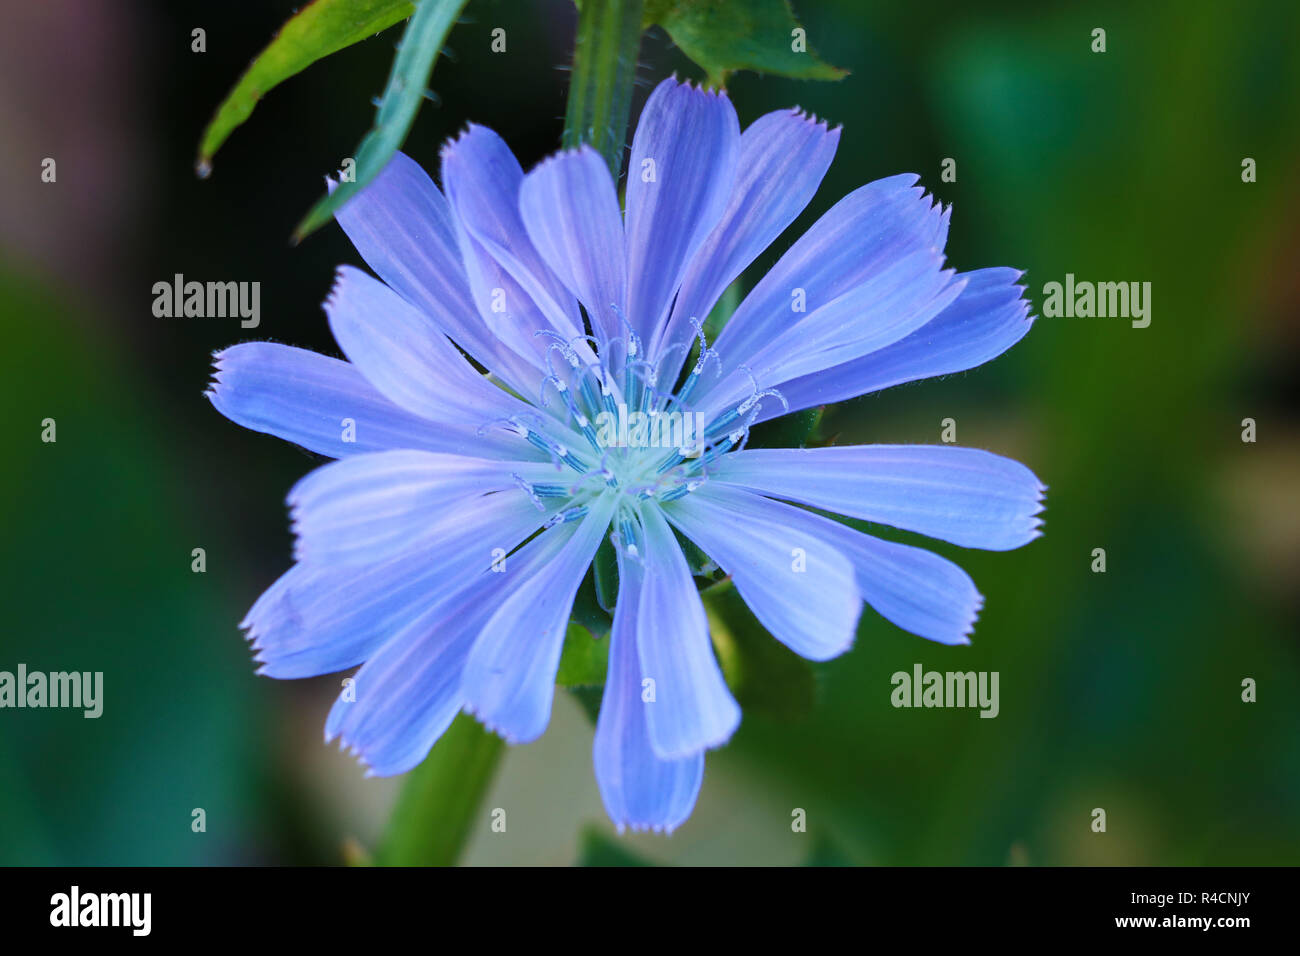 flower of Common chicory, Cichorium intybus, wild chicory, chicory, edible plant, nature, food, food and rink, vegetable, natural food outdoor plant f Stock Photo